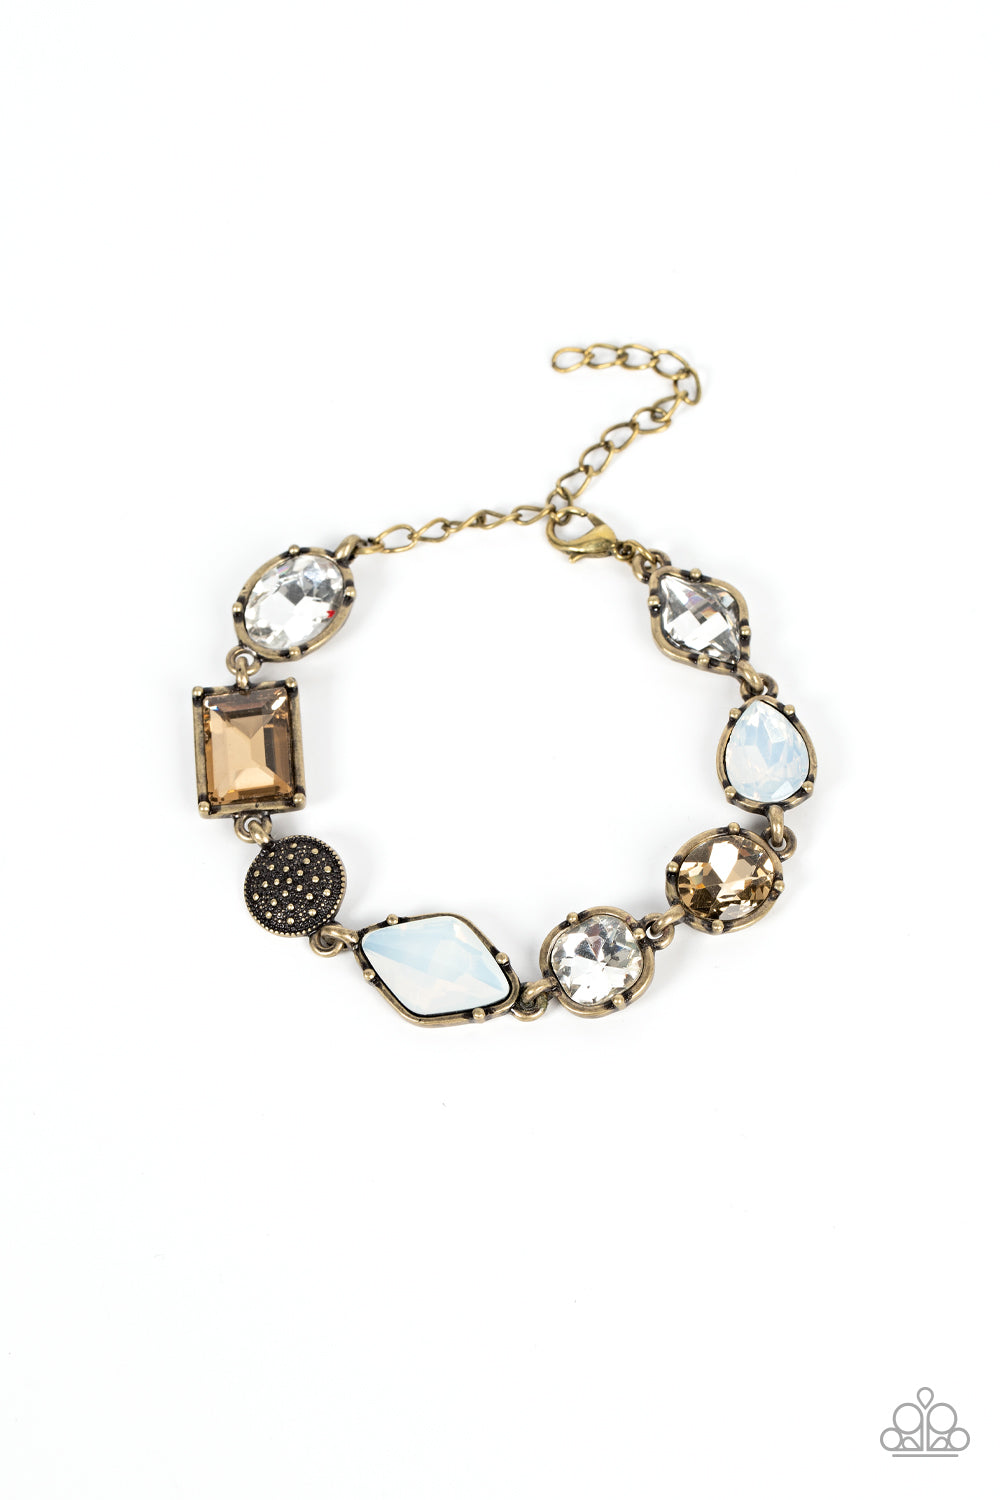 Encased in pronged brass fittings, a mismatched collection of brassy, white, and opal rhinestones delicately links with a studded brass frame around the wrist